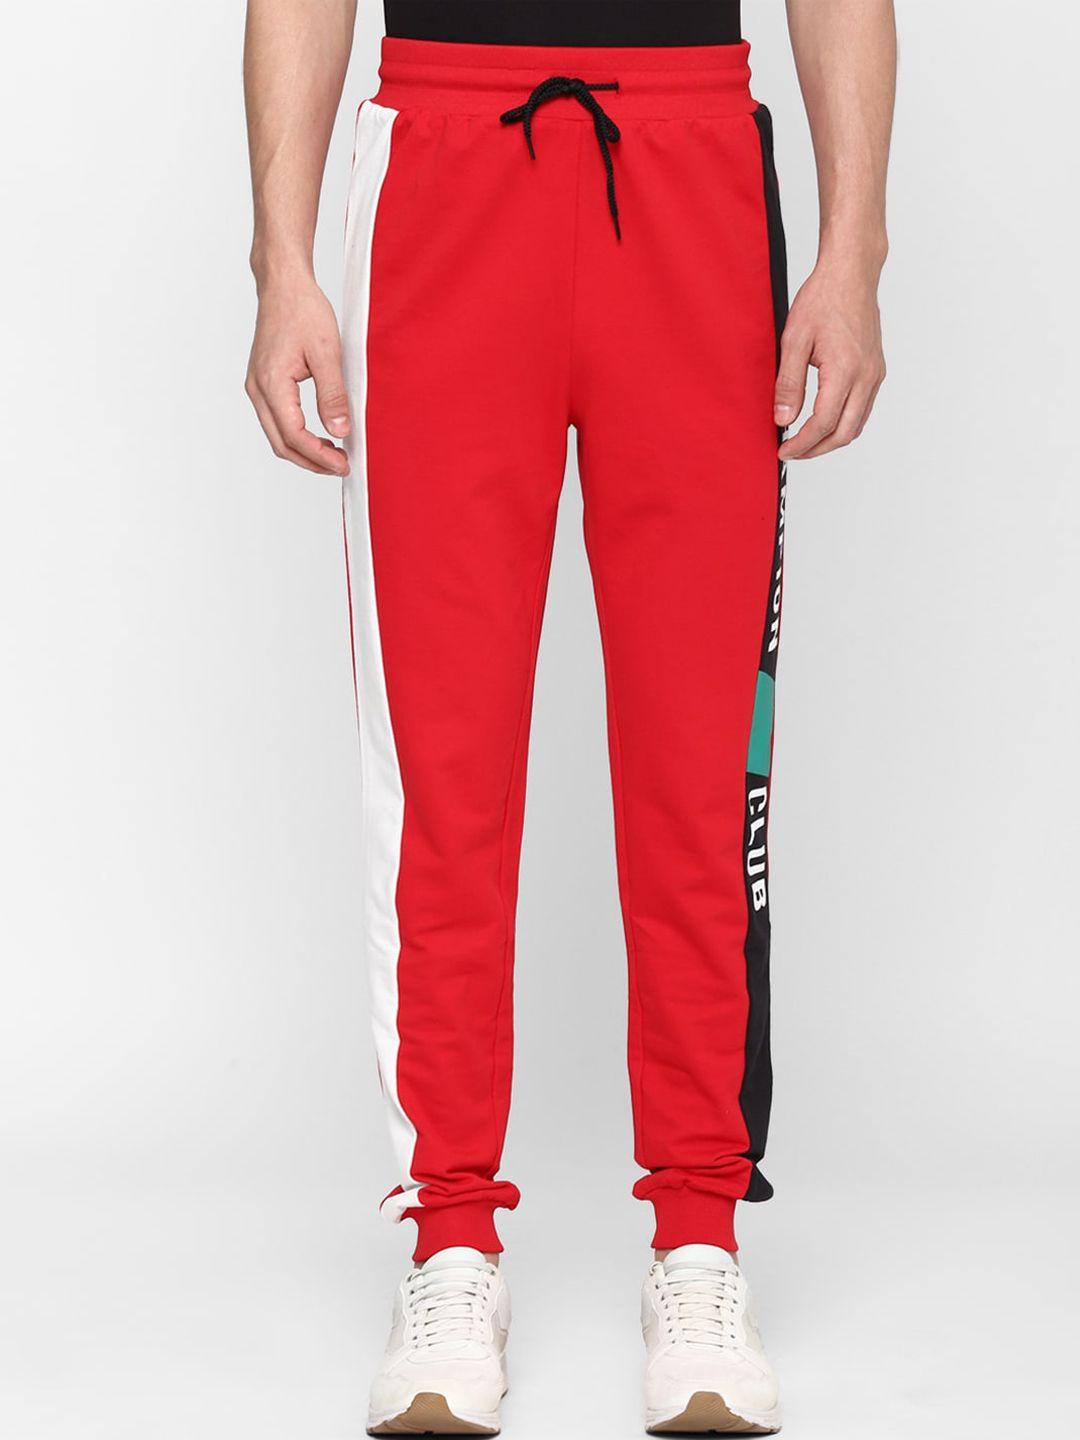 forever-21-men-red-printed-track-pants